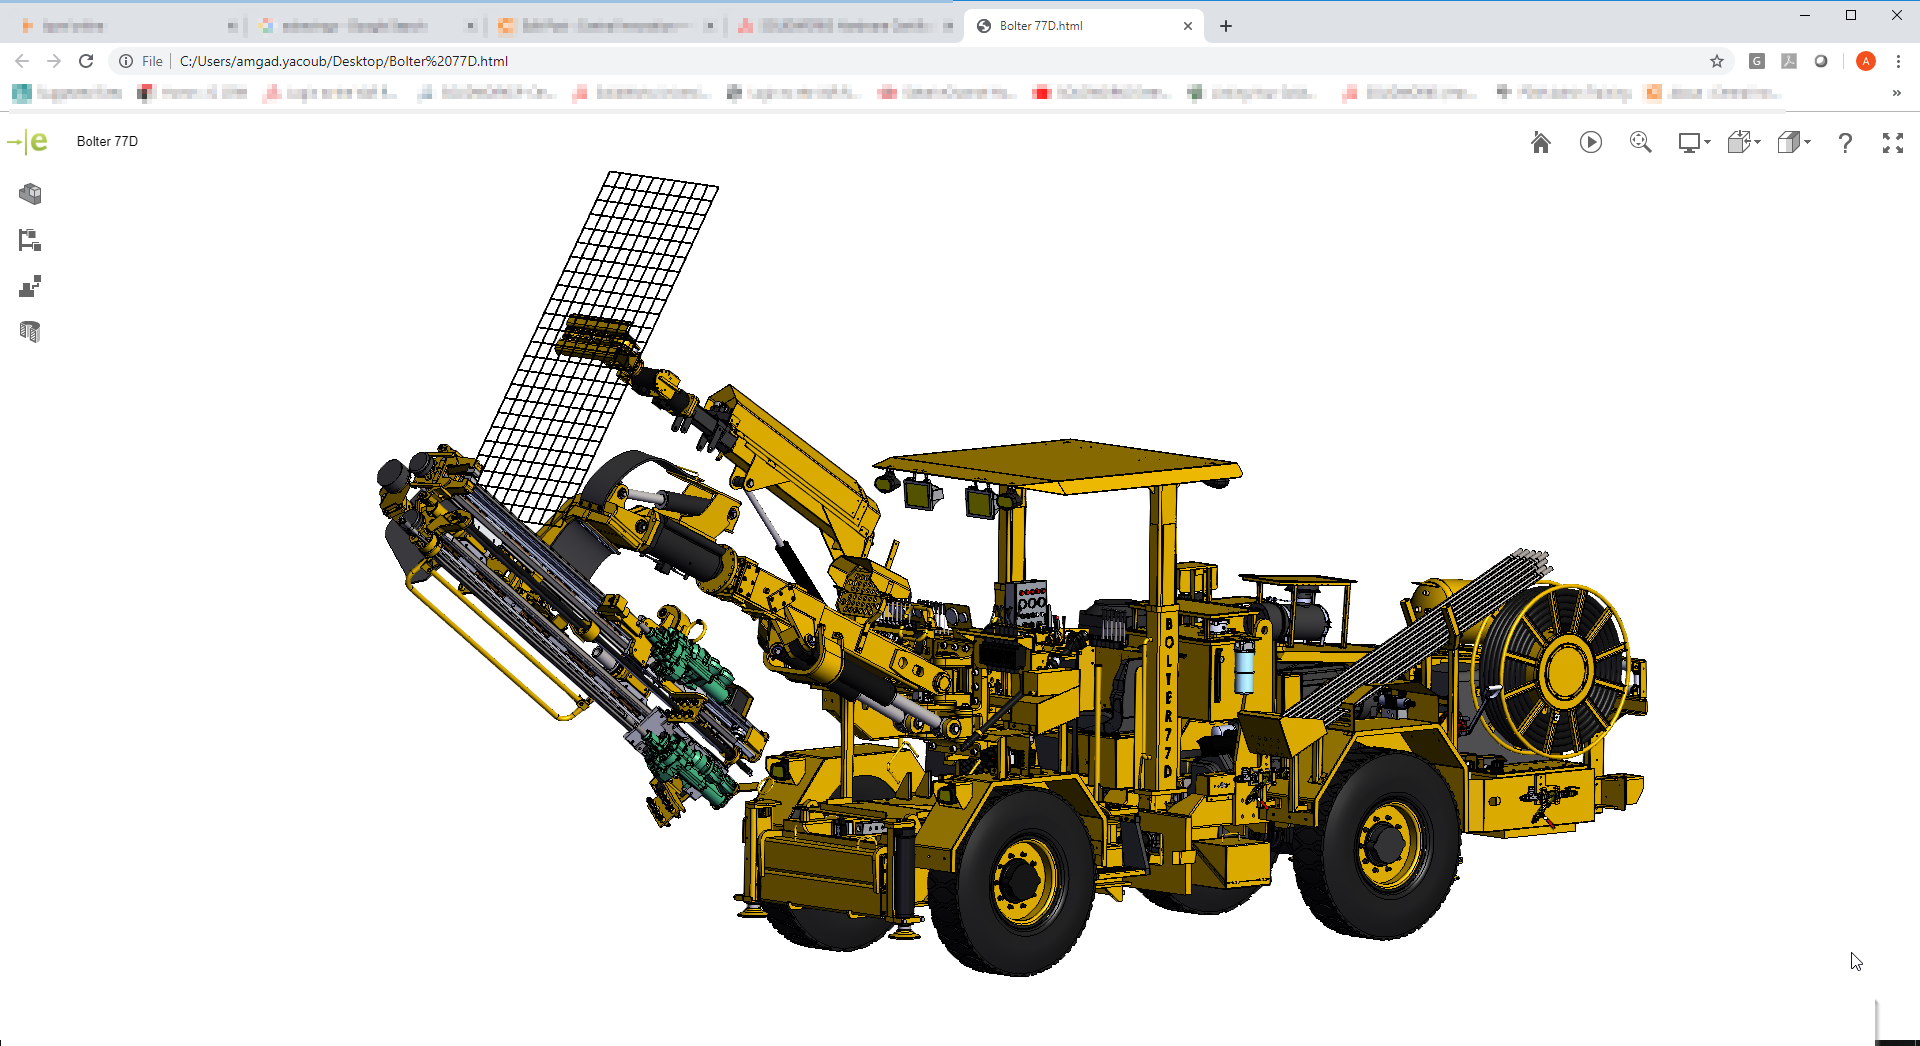 solidworks edrawing viewer free